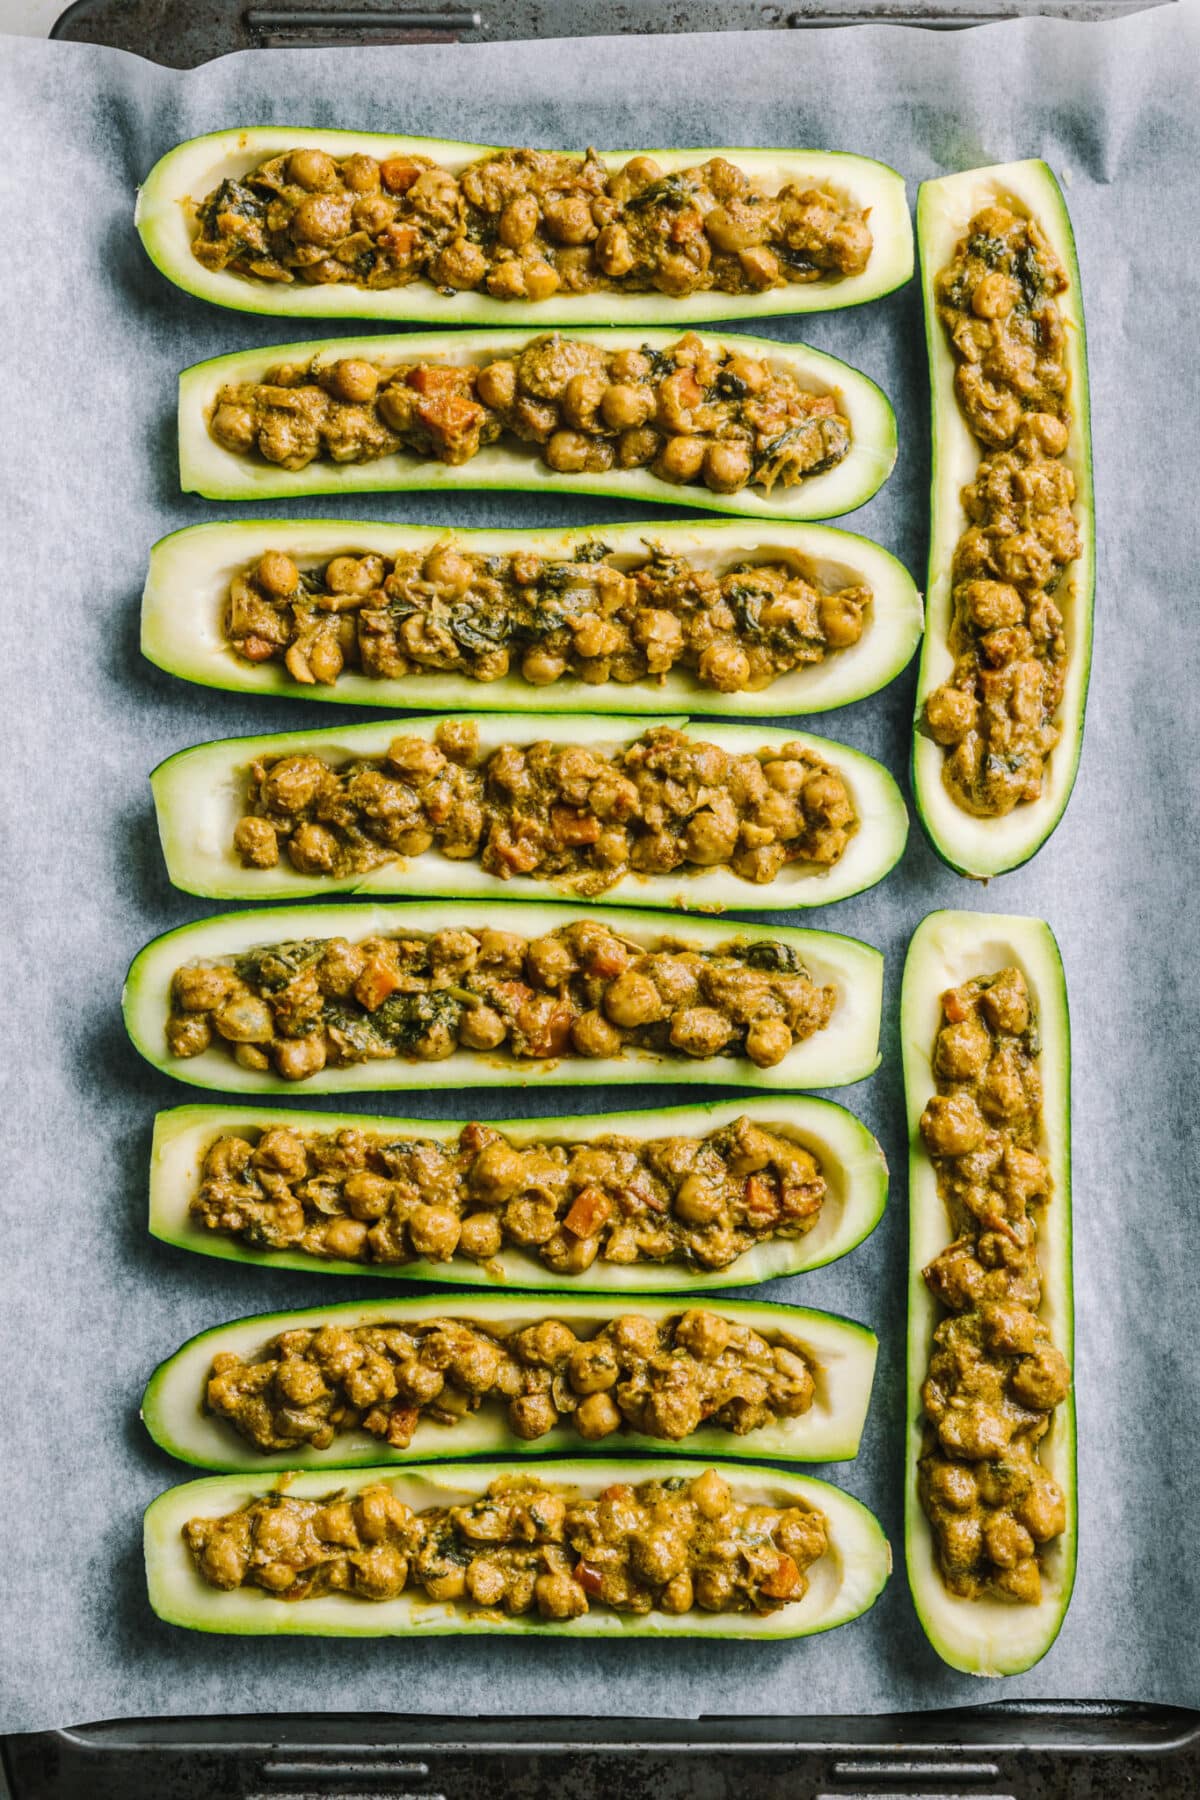 Baking pan lined with parchment paper, filled with uncooked chickpea curry stuffed zucchini boats.